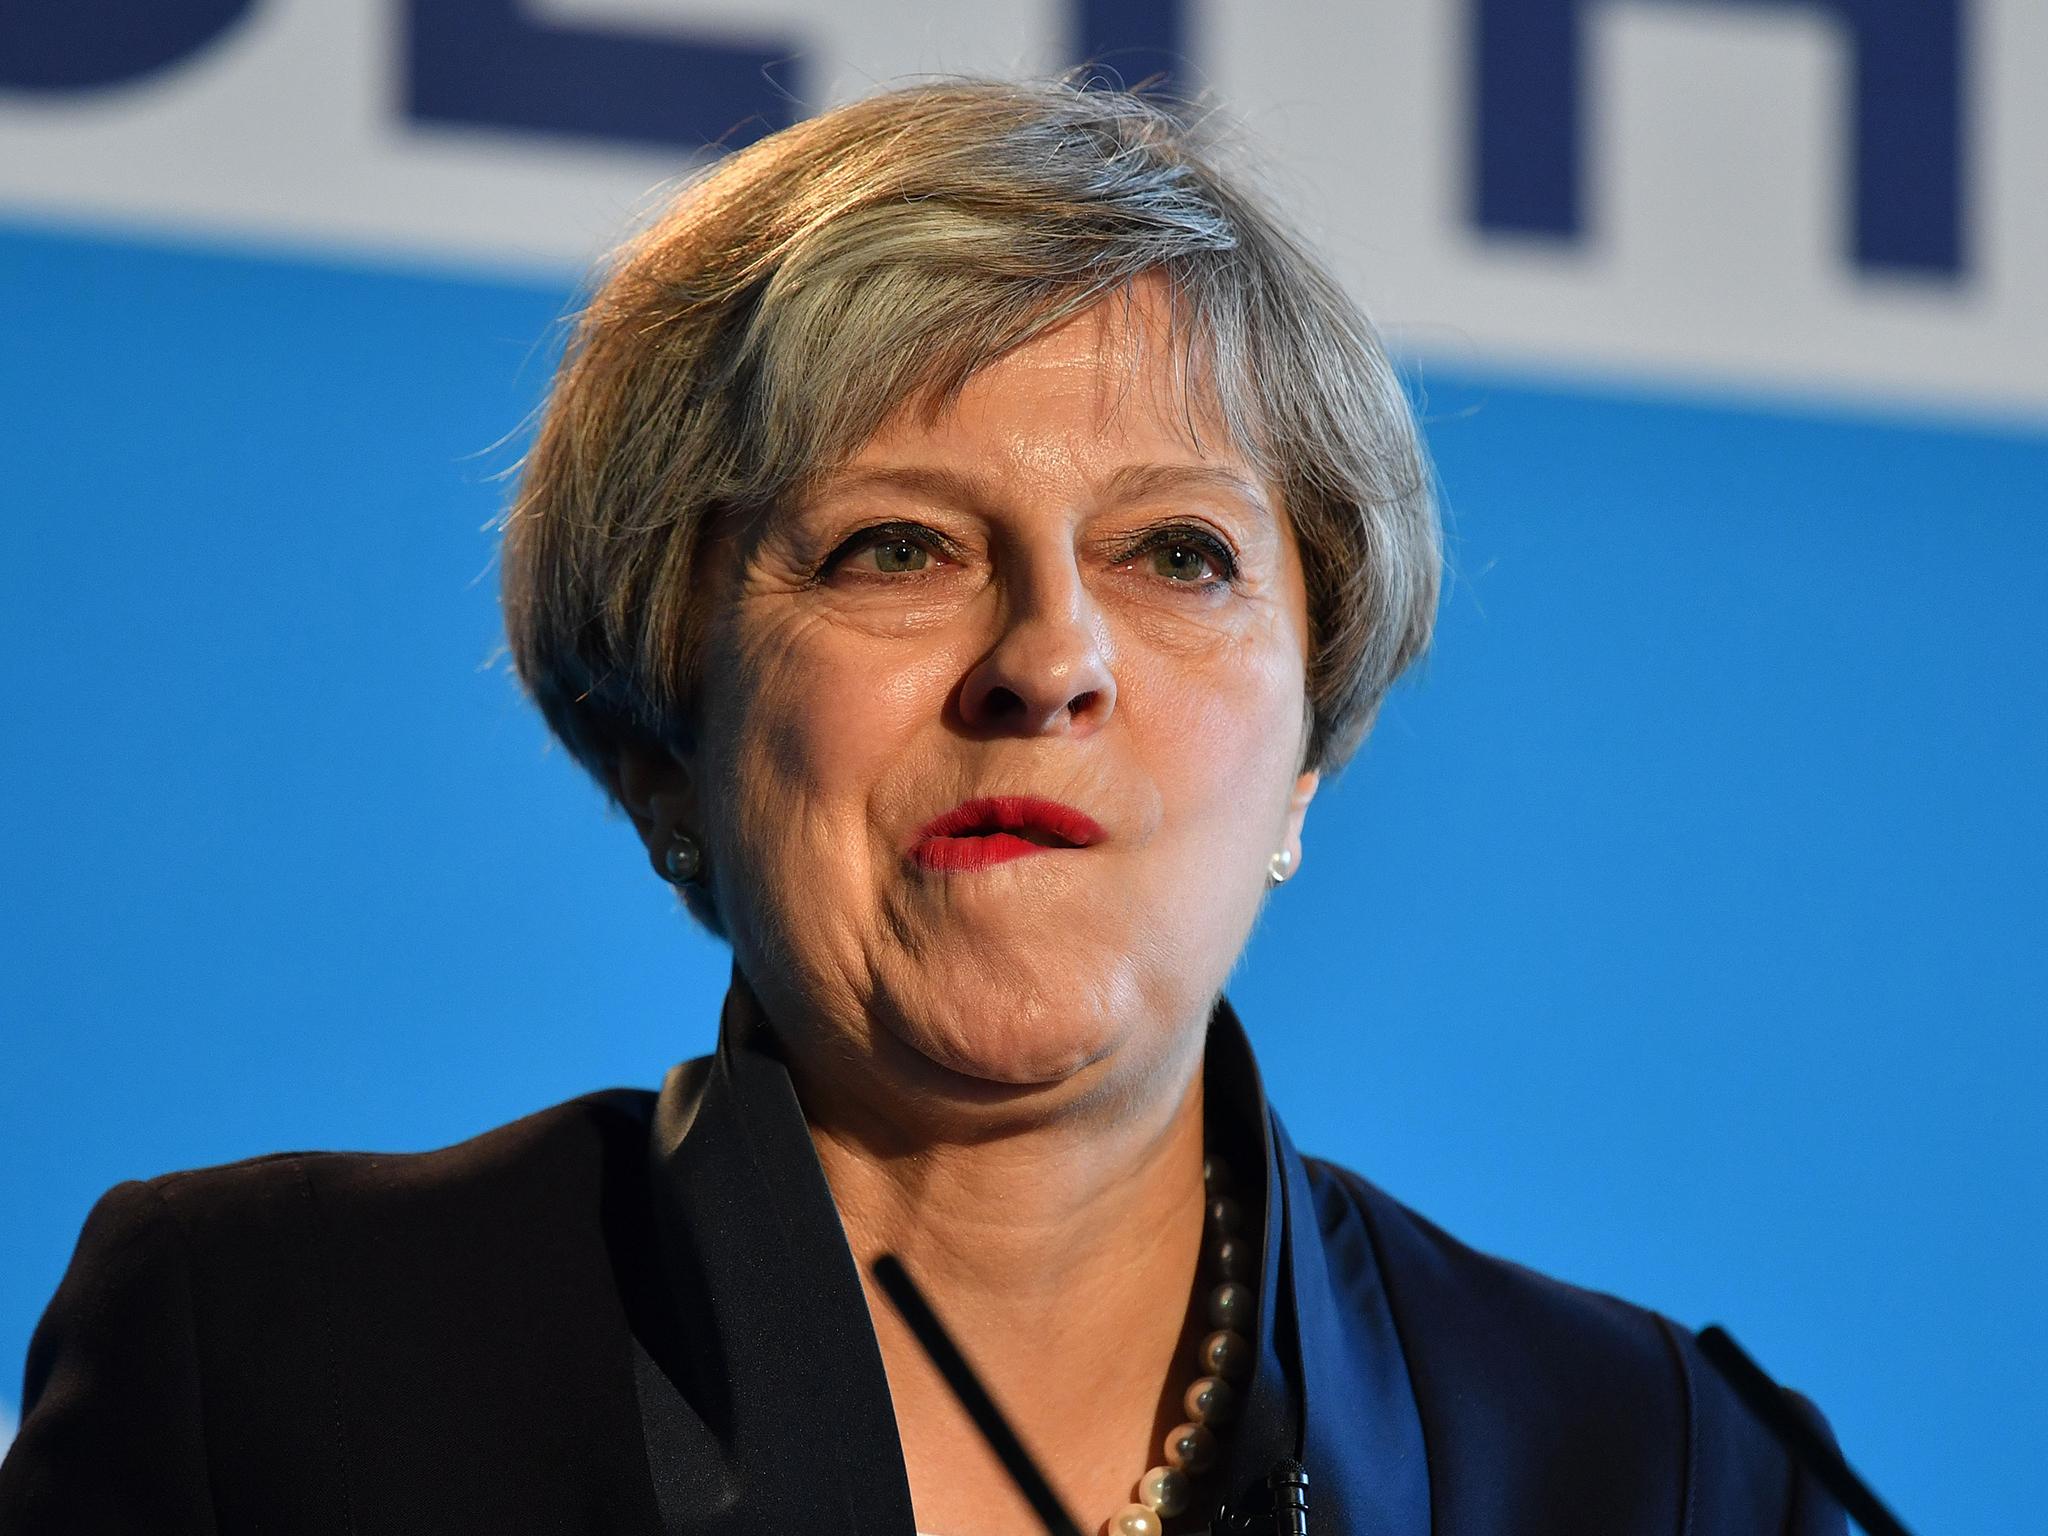 Theresa May says &apos;you can have all the evidence, but headteachers told me grammar schools are good&apos;, education researcher claims